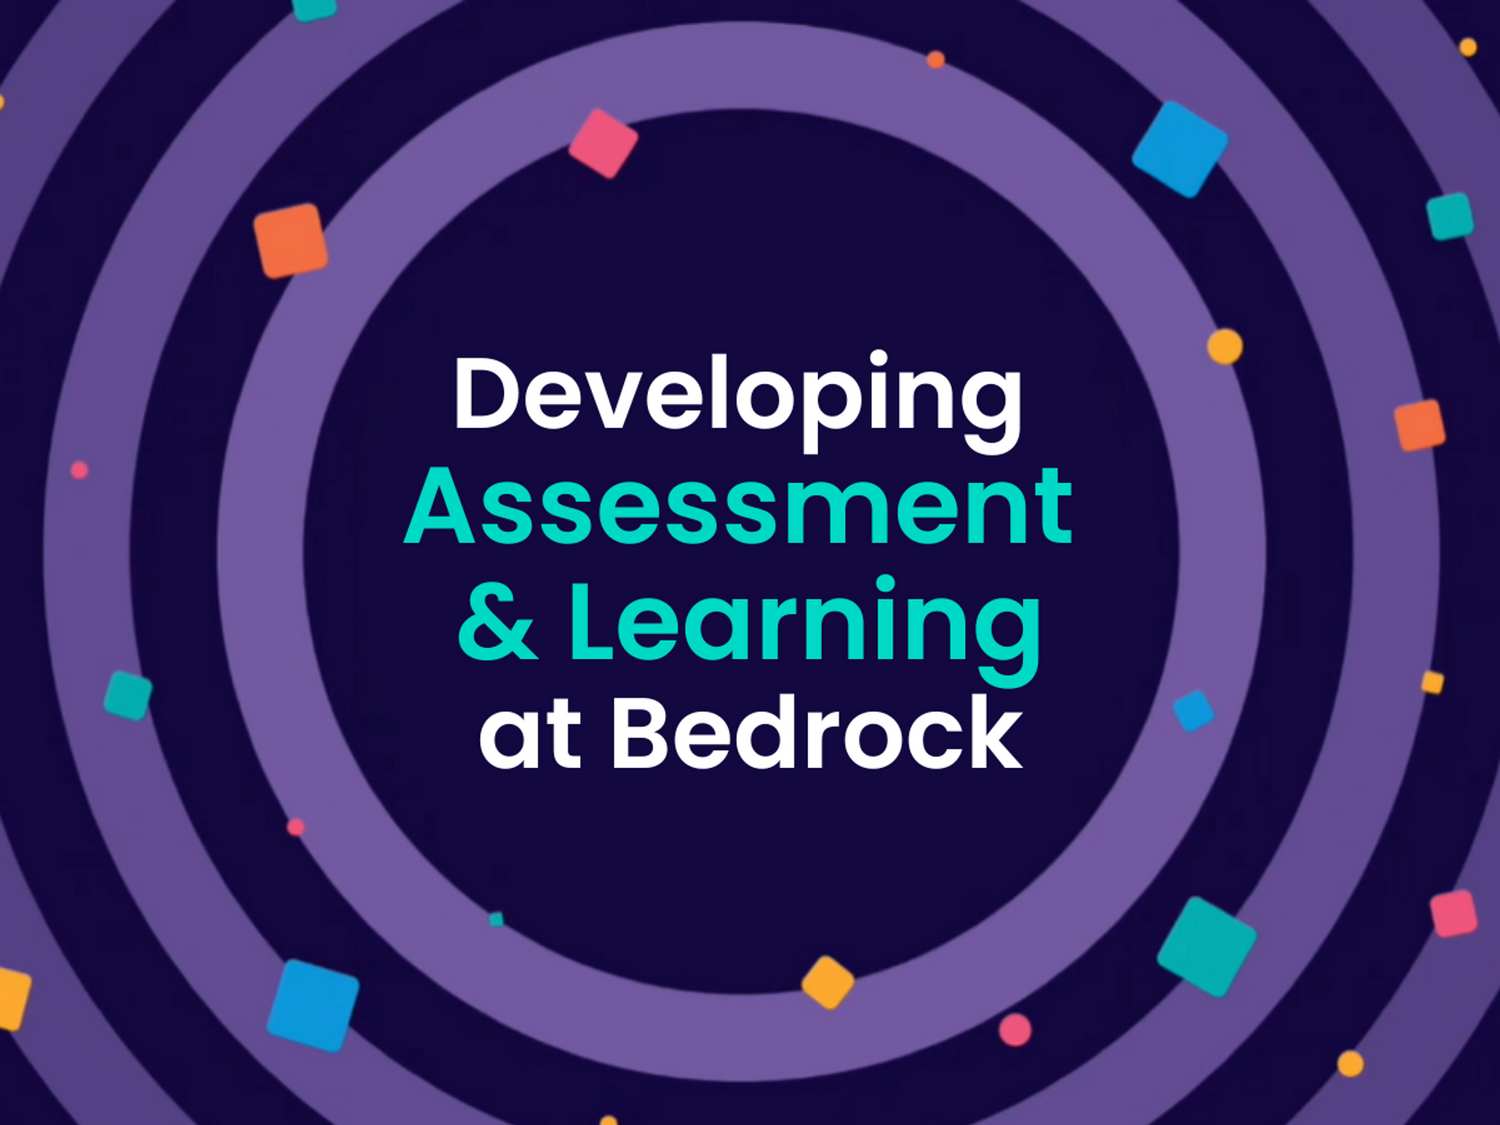 Developing assessment and learning at Bedrock